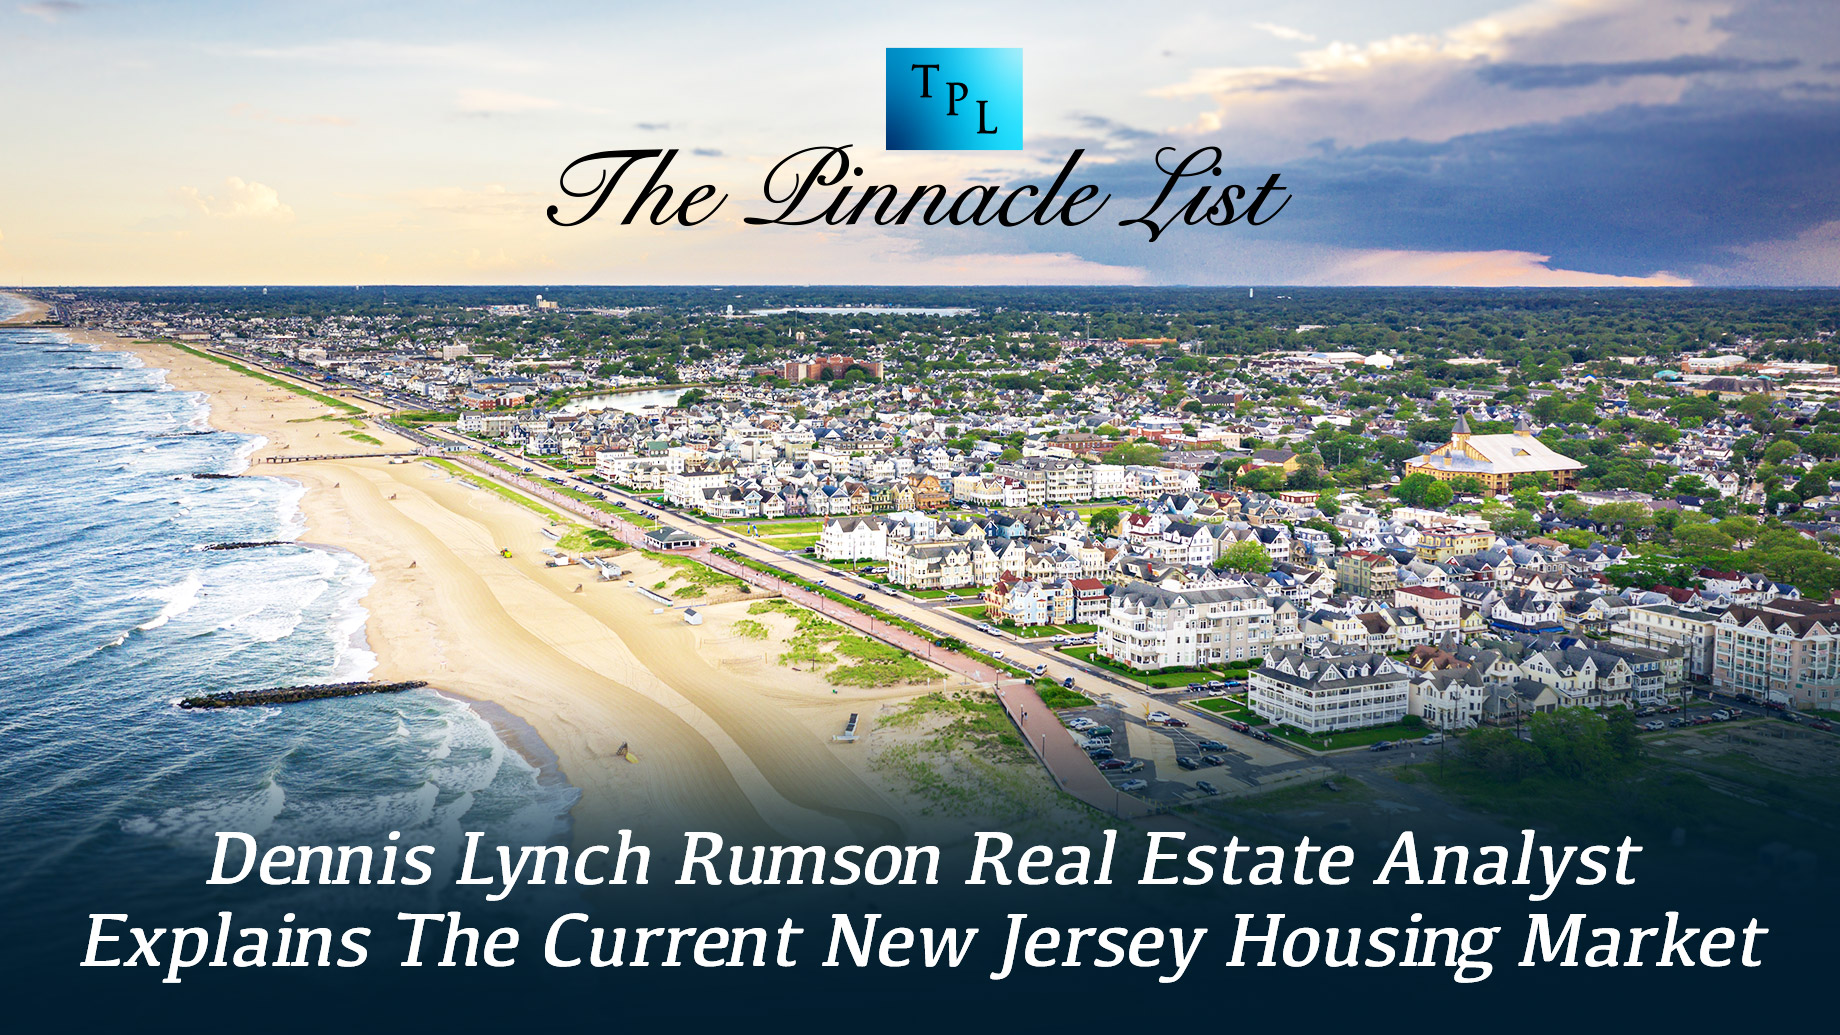 Dennis Lynch Rumson Real Estate Analyst Explains The Current New Jersey Housing Market